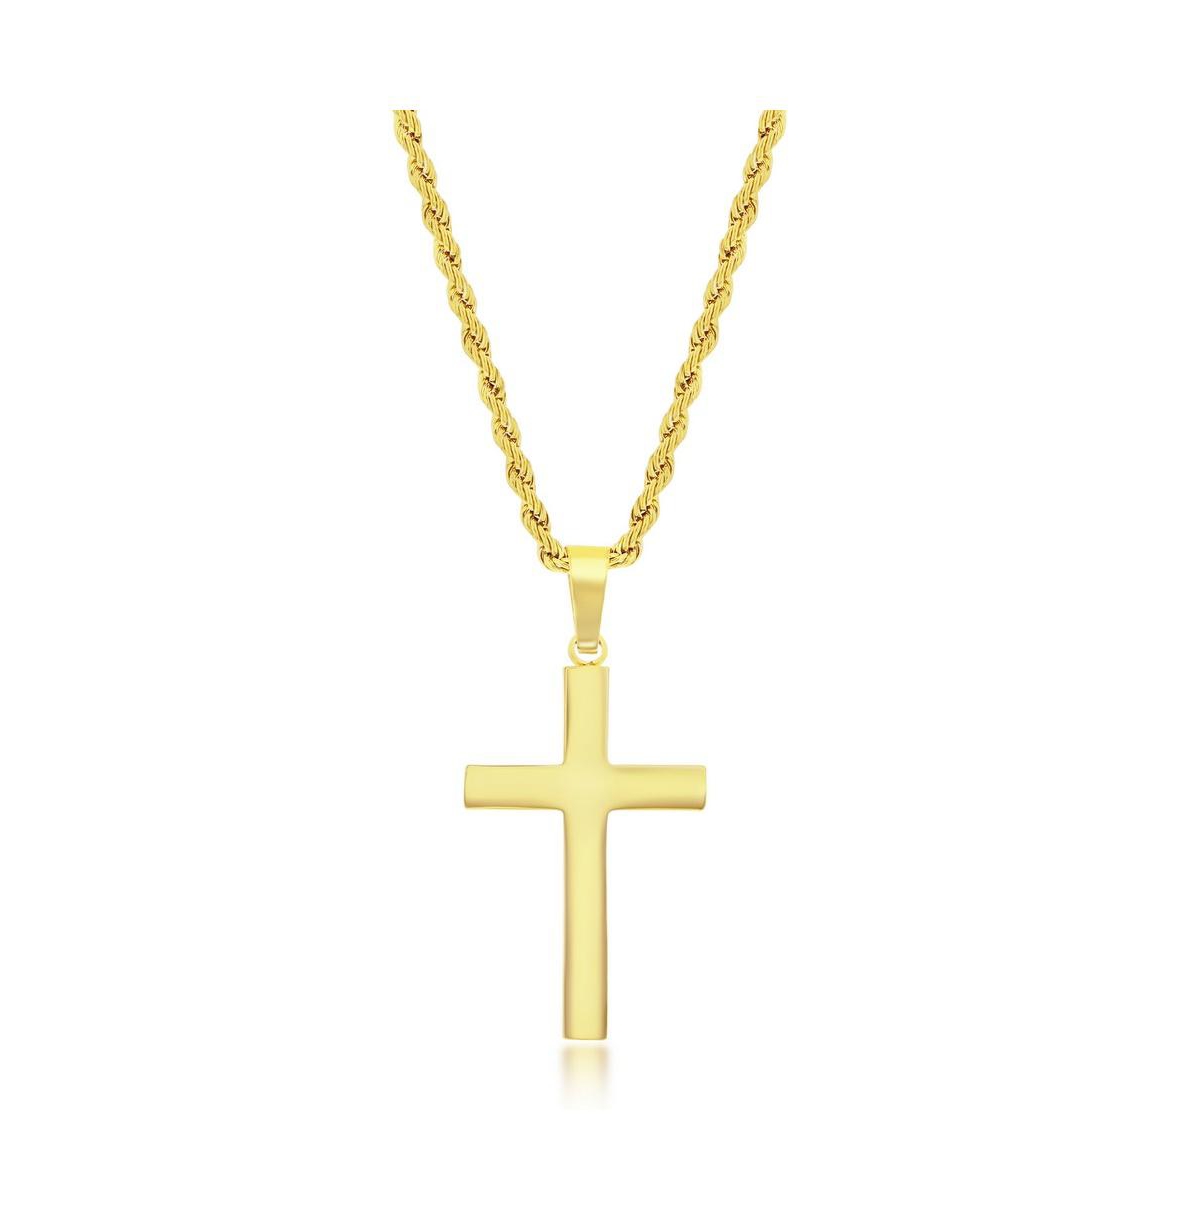 Stainless Steel Polished Cross Necklace - Gold